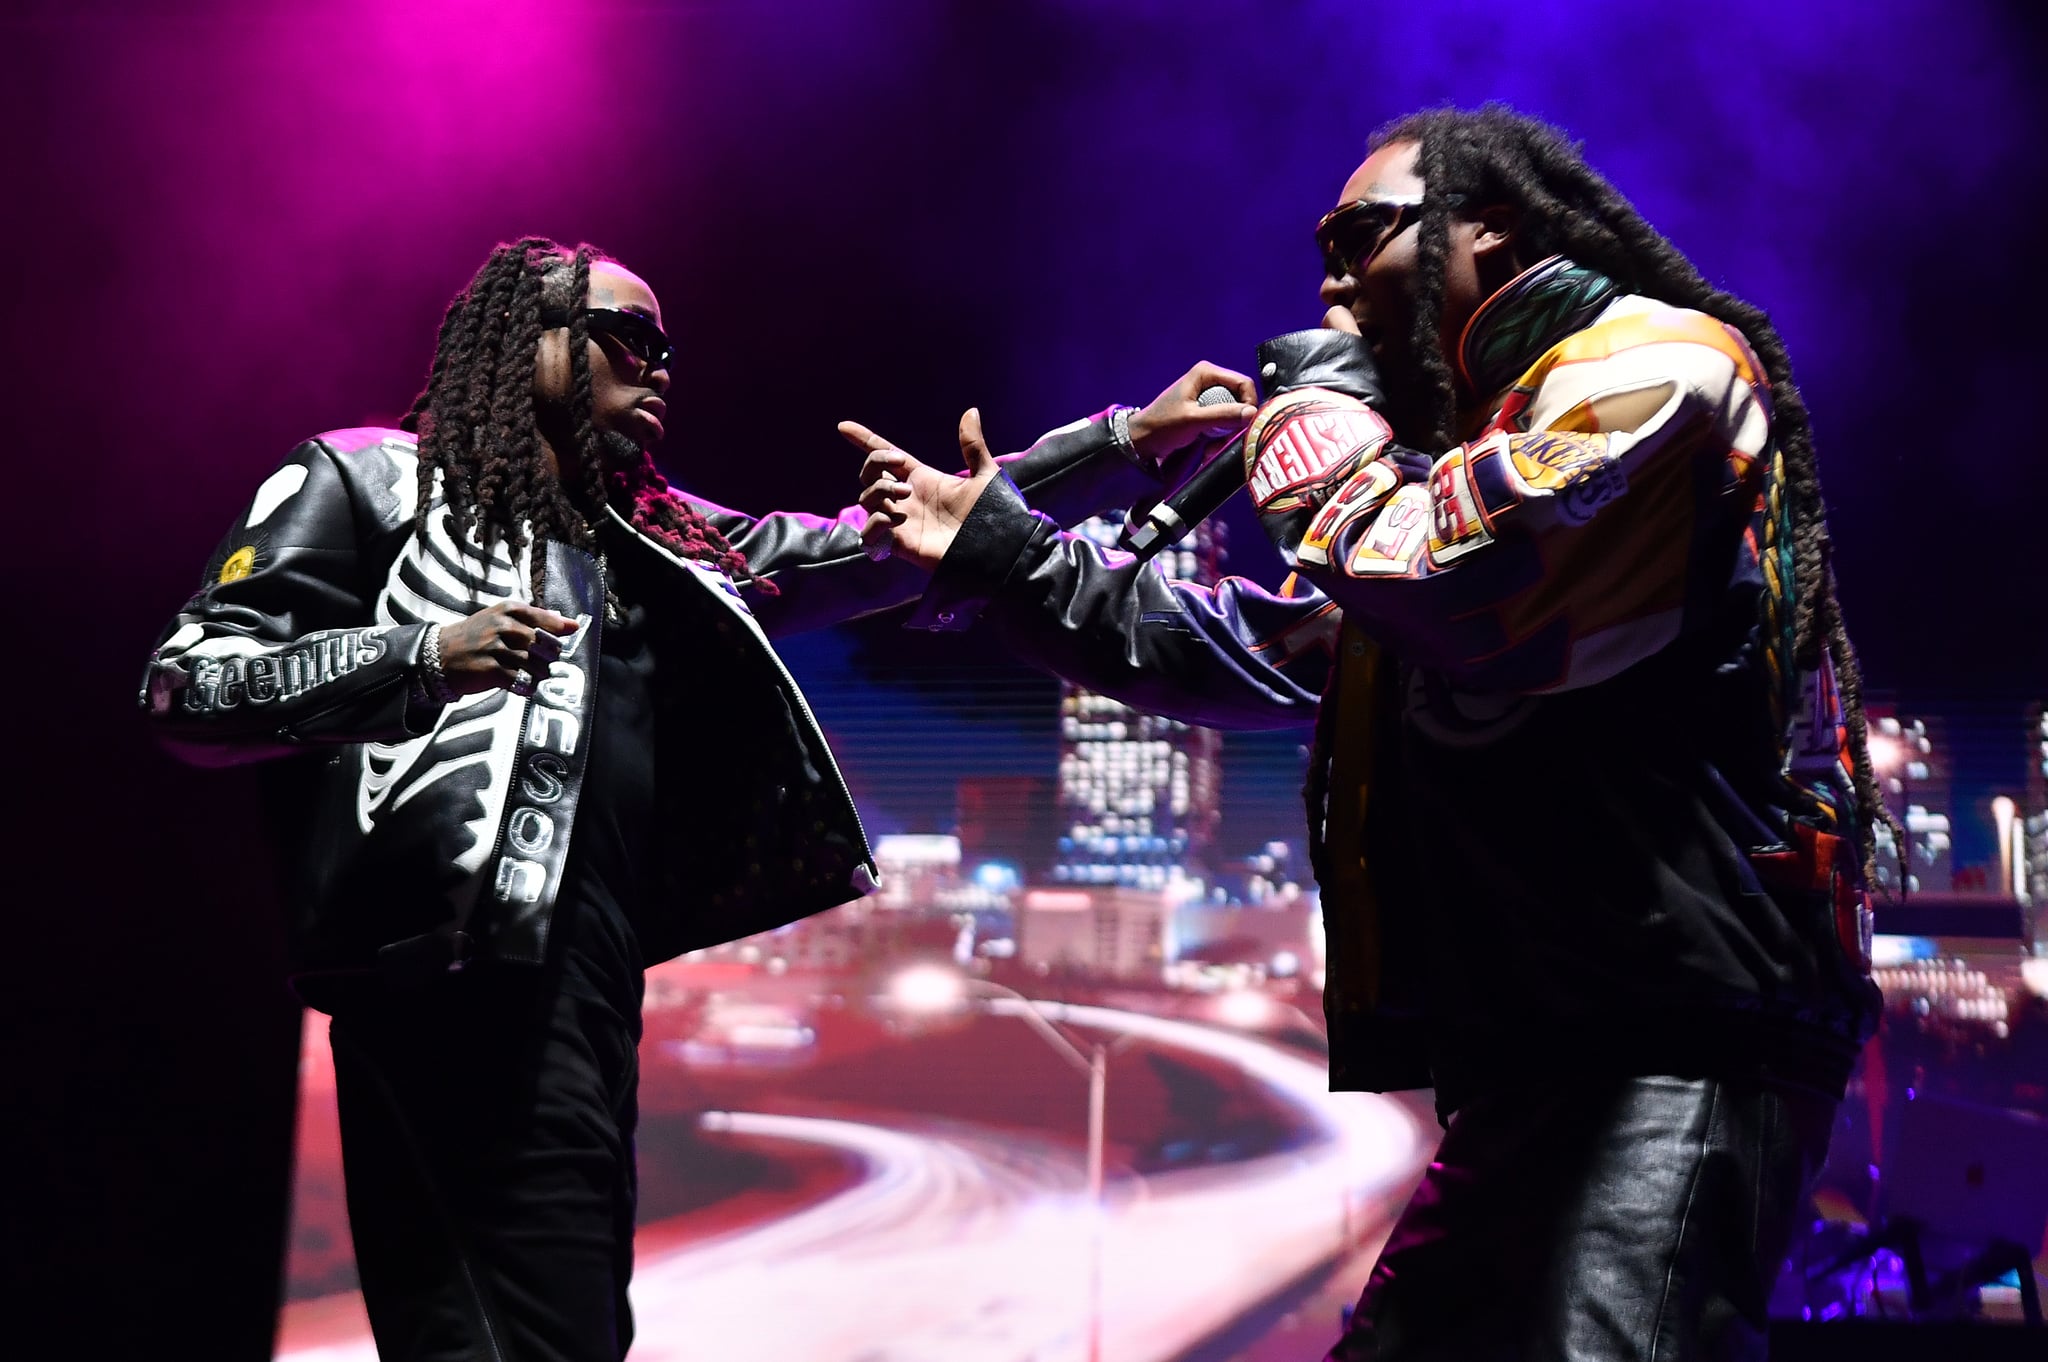 Quavo and Takeoff performing at the 2022 ONE MusicFest in Atlanta, Georgia.